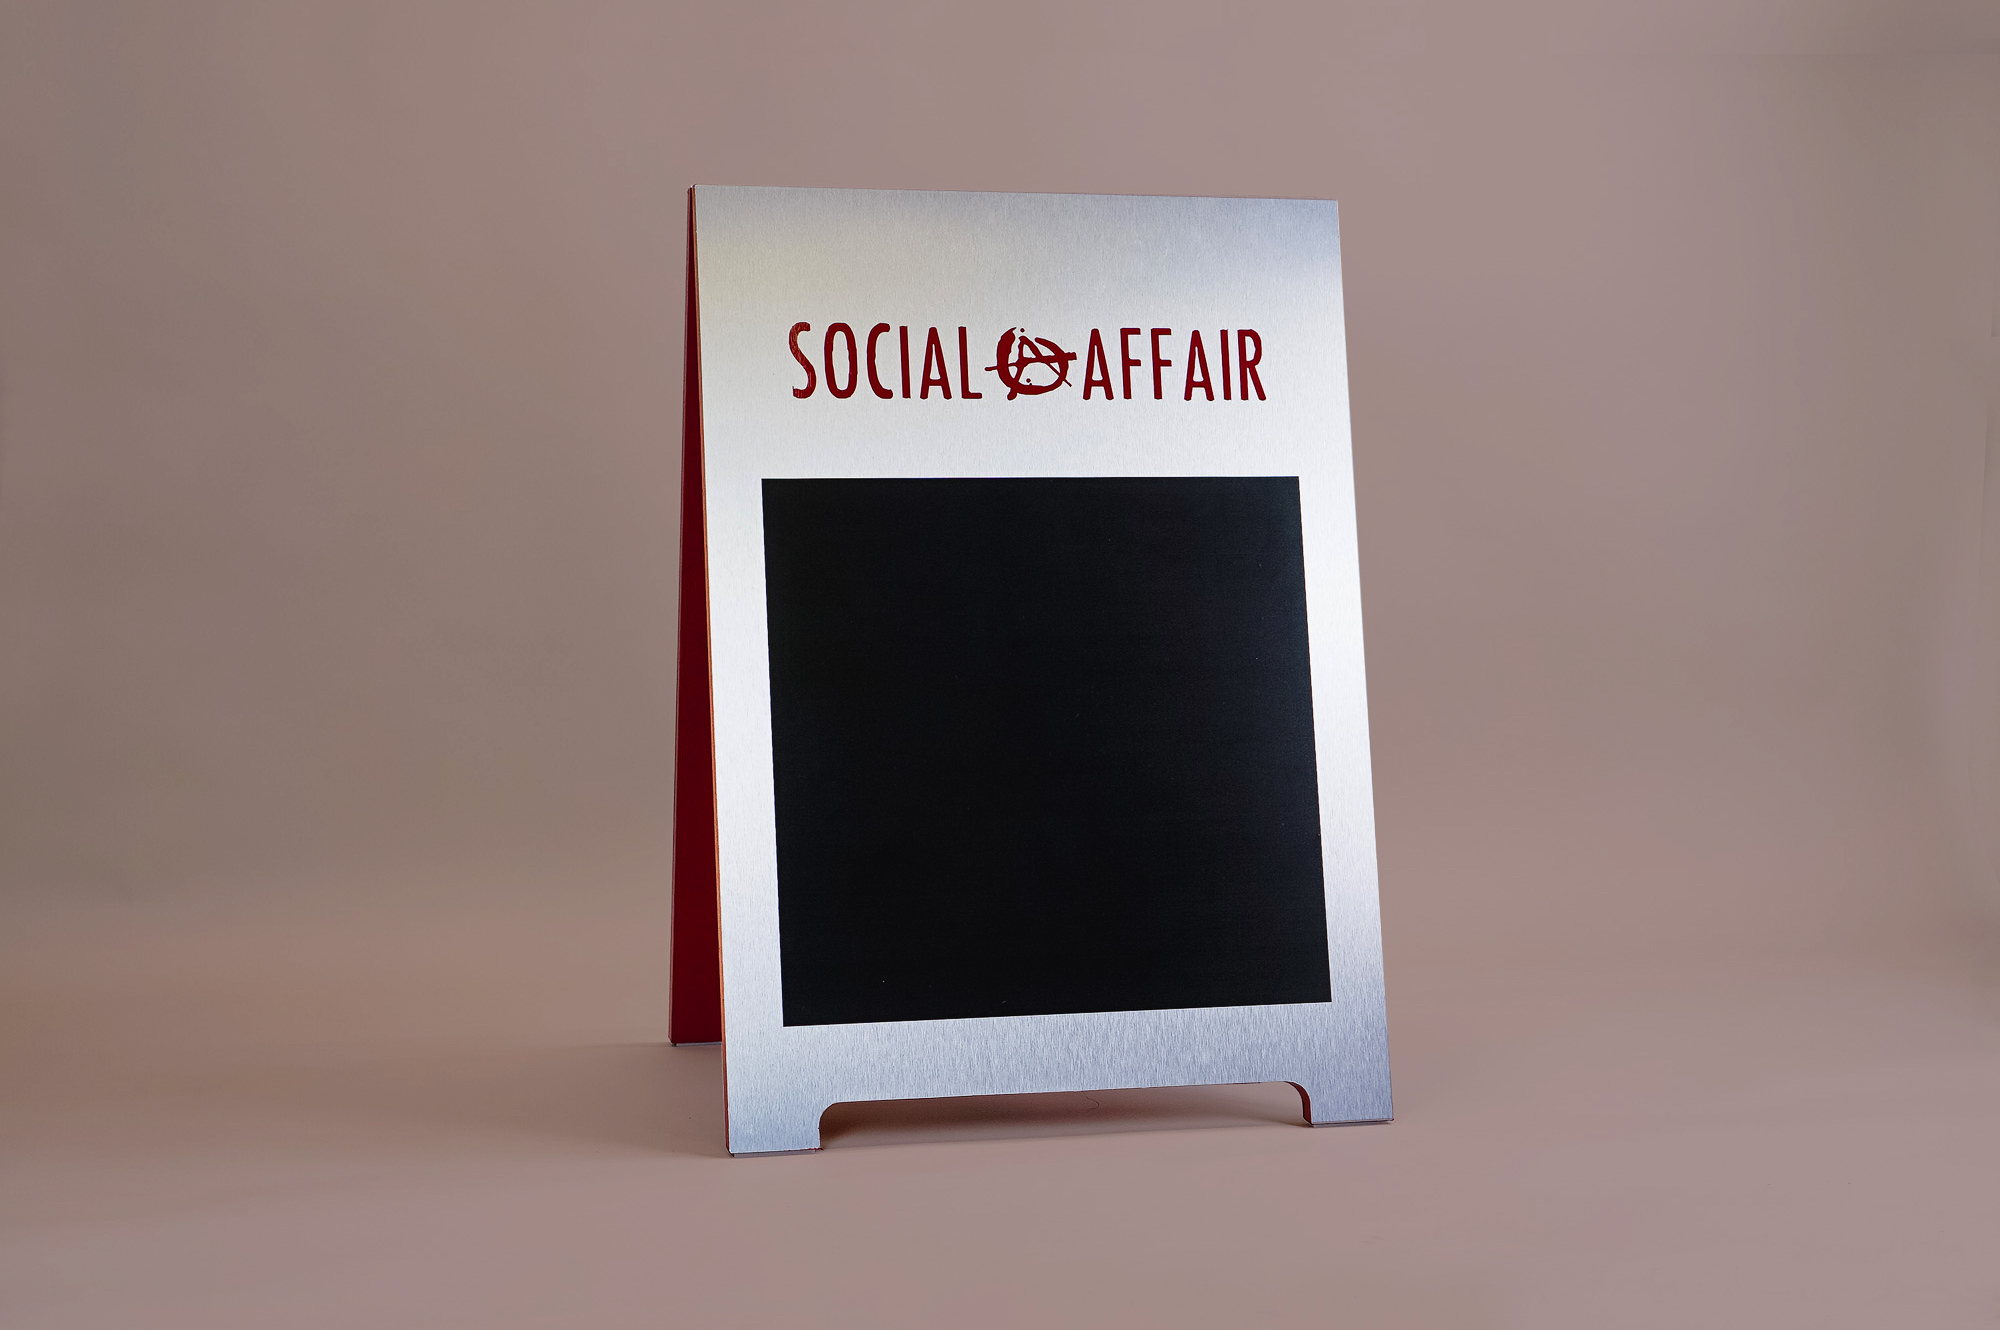 Metal and red A-frame sign for Social Affair, a restaurant serving artisanal food, wine and chai in a casual and modern lounge